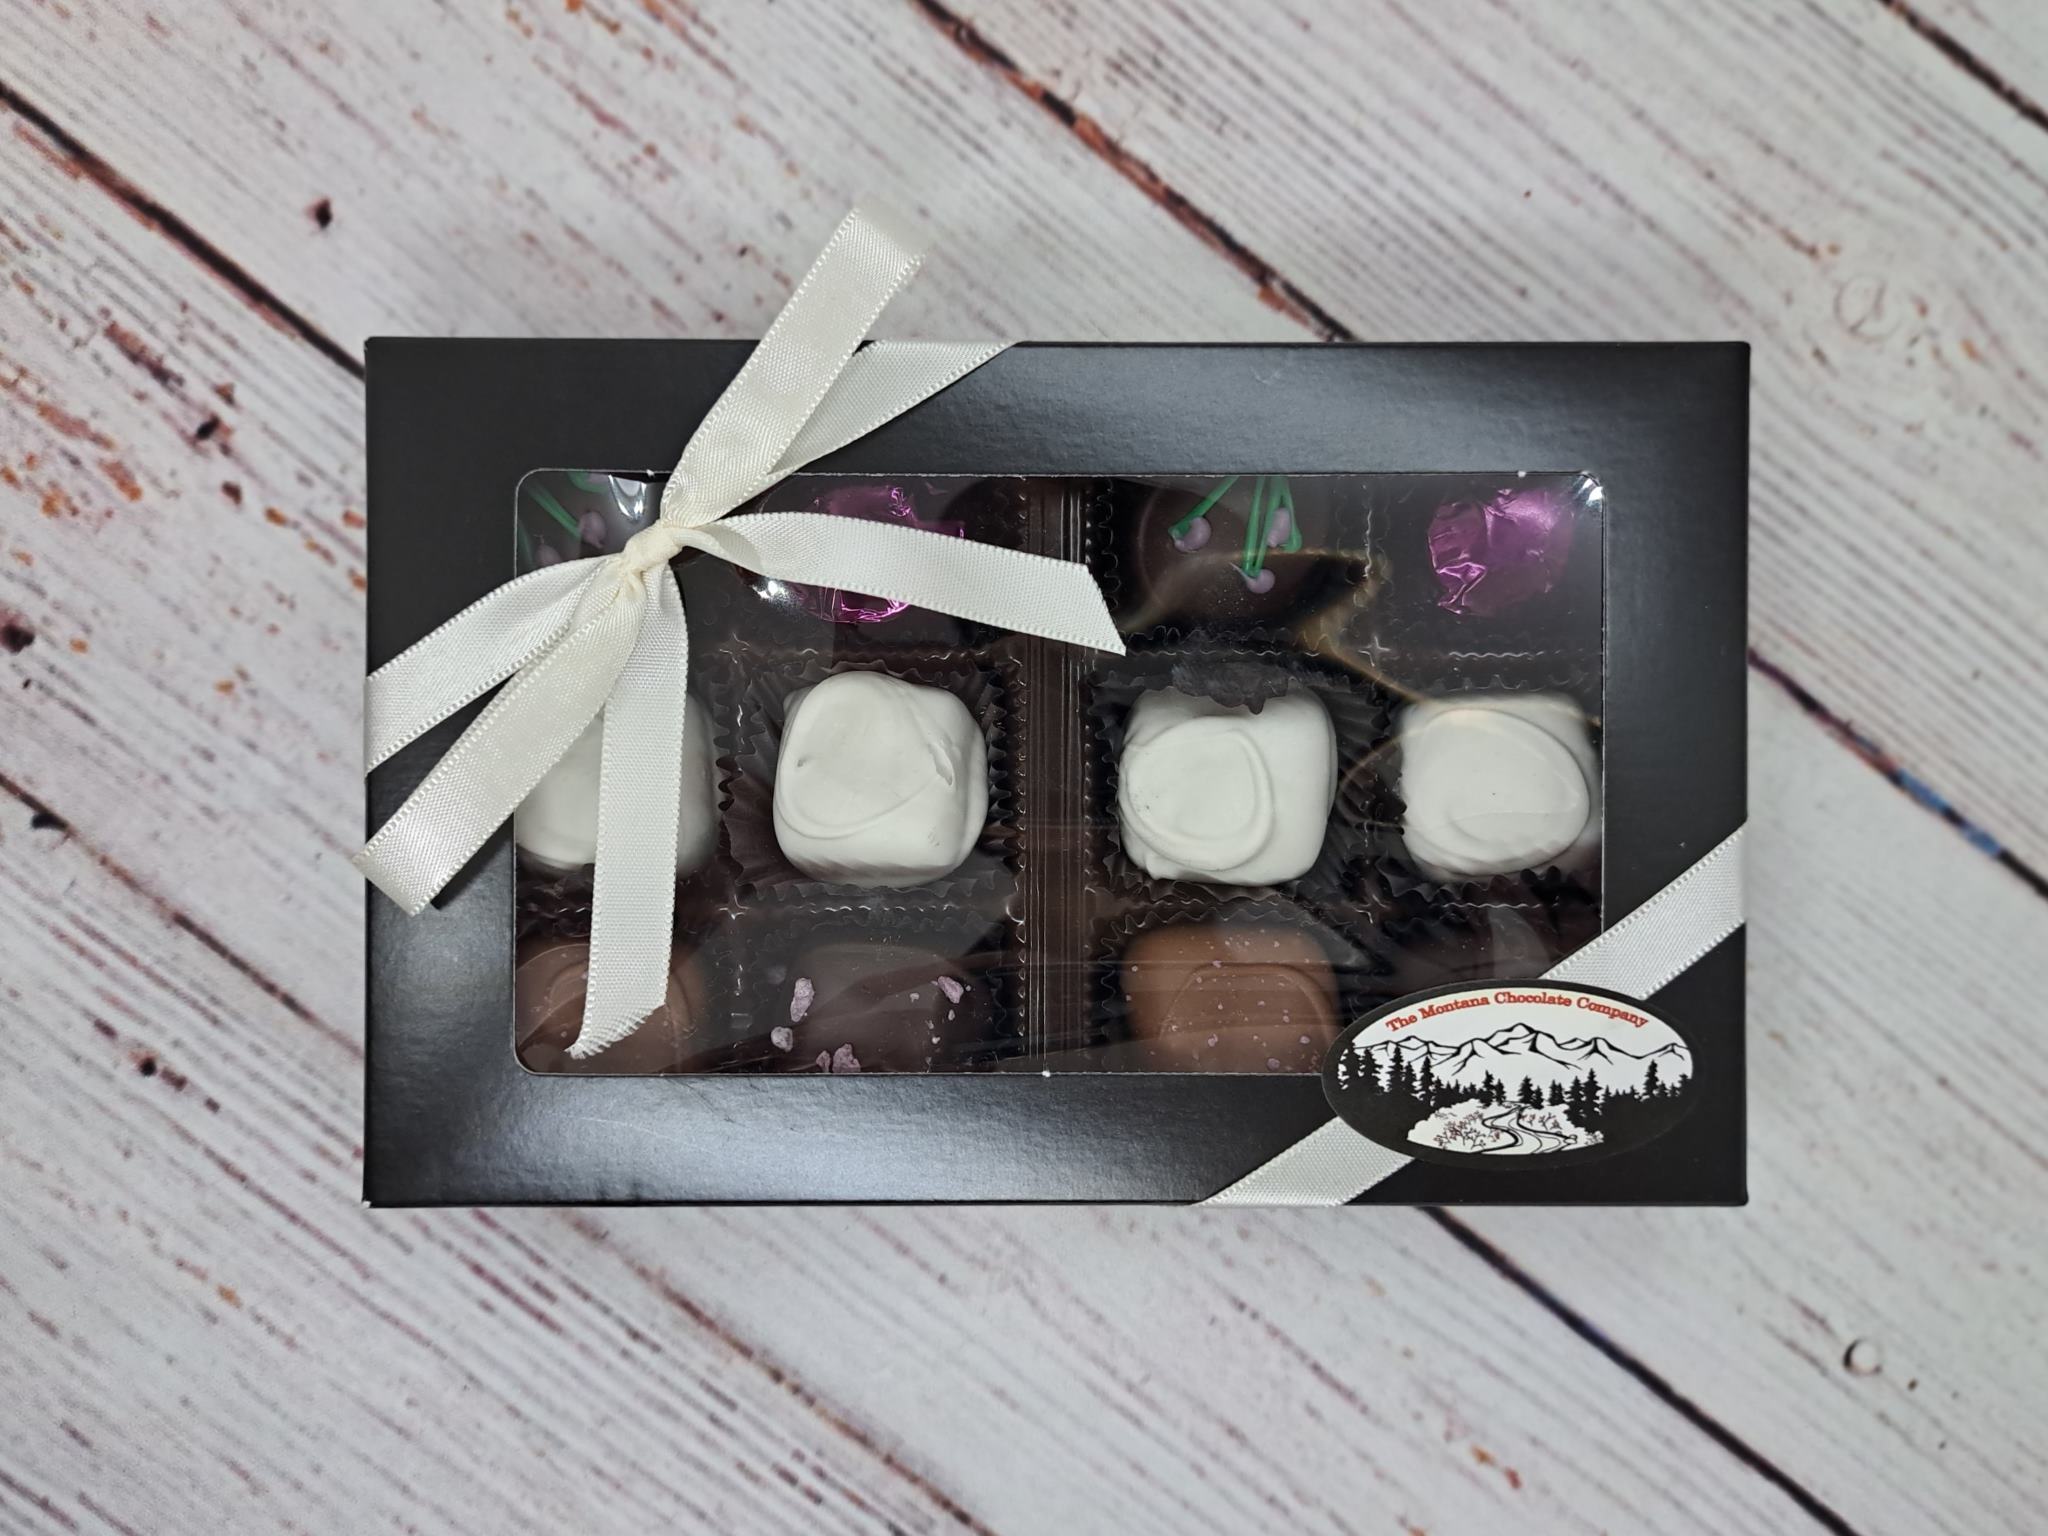 The Montana Chocolate Company Ultimate Huckleberry Box, 12pc Huckleberry Box Includes an equal number milk, dark and white chocolates Hand-crafted in Stevensville, MT 12-piece collection, Black Box with White Ribbon